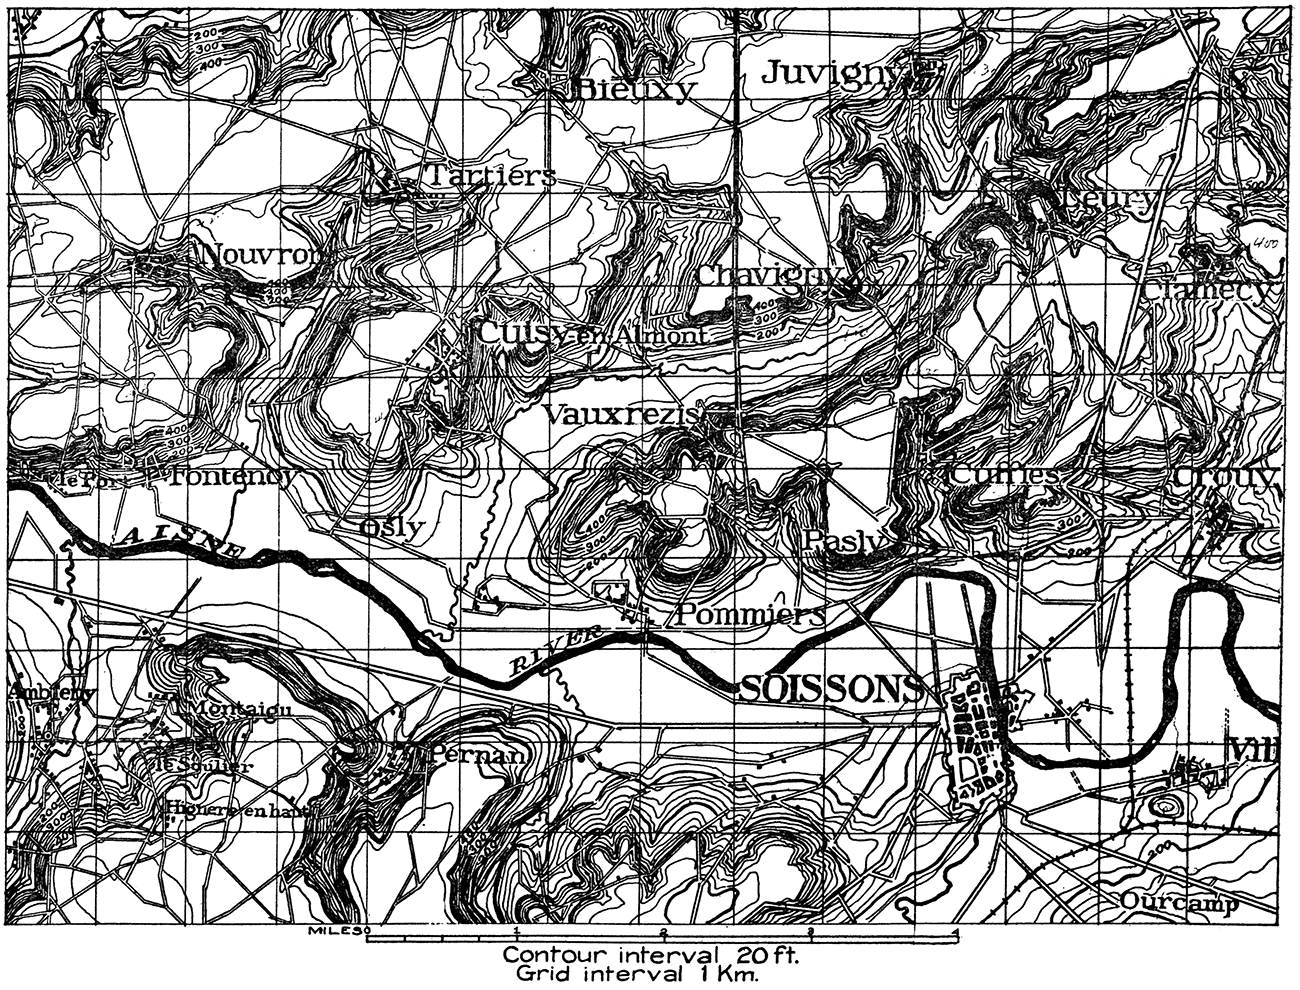 Topographic map of region about Soissons, France.